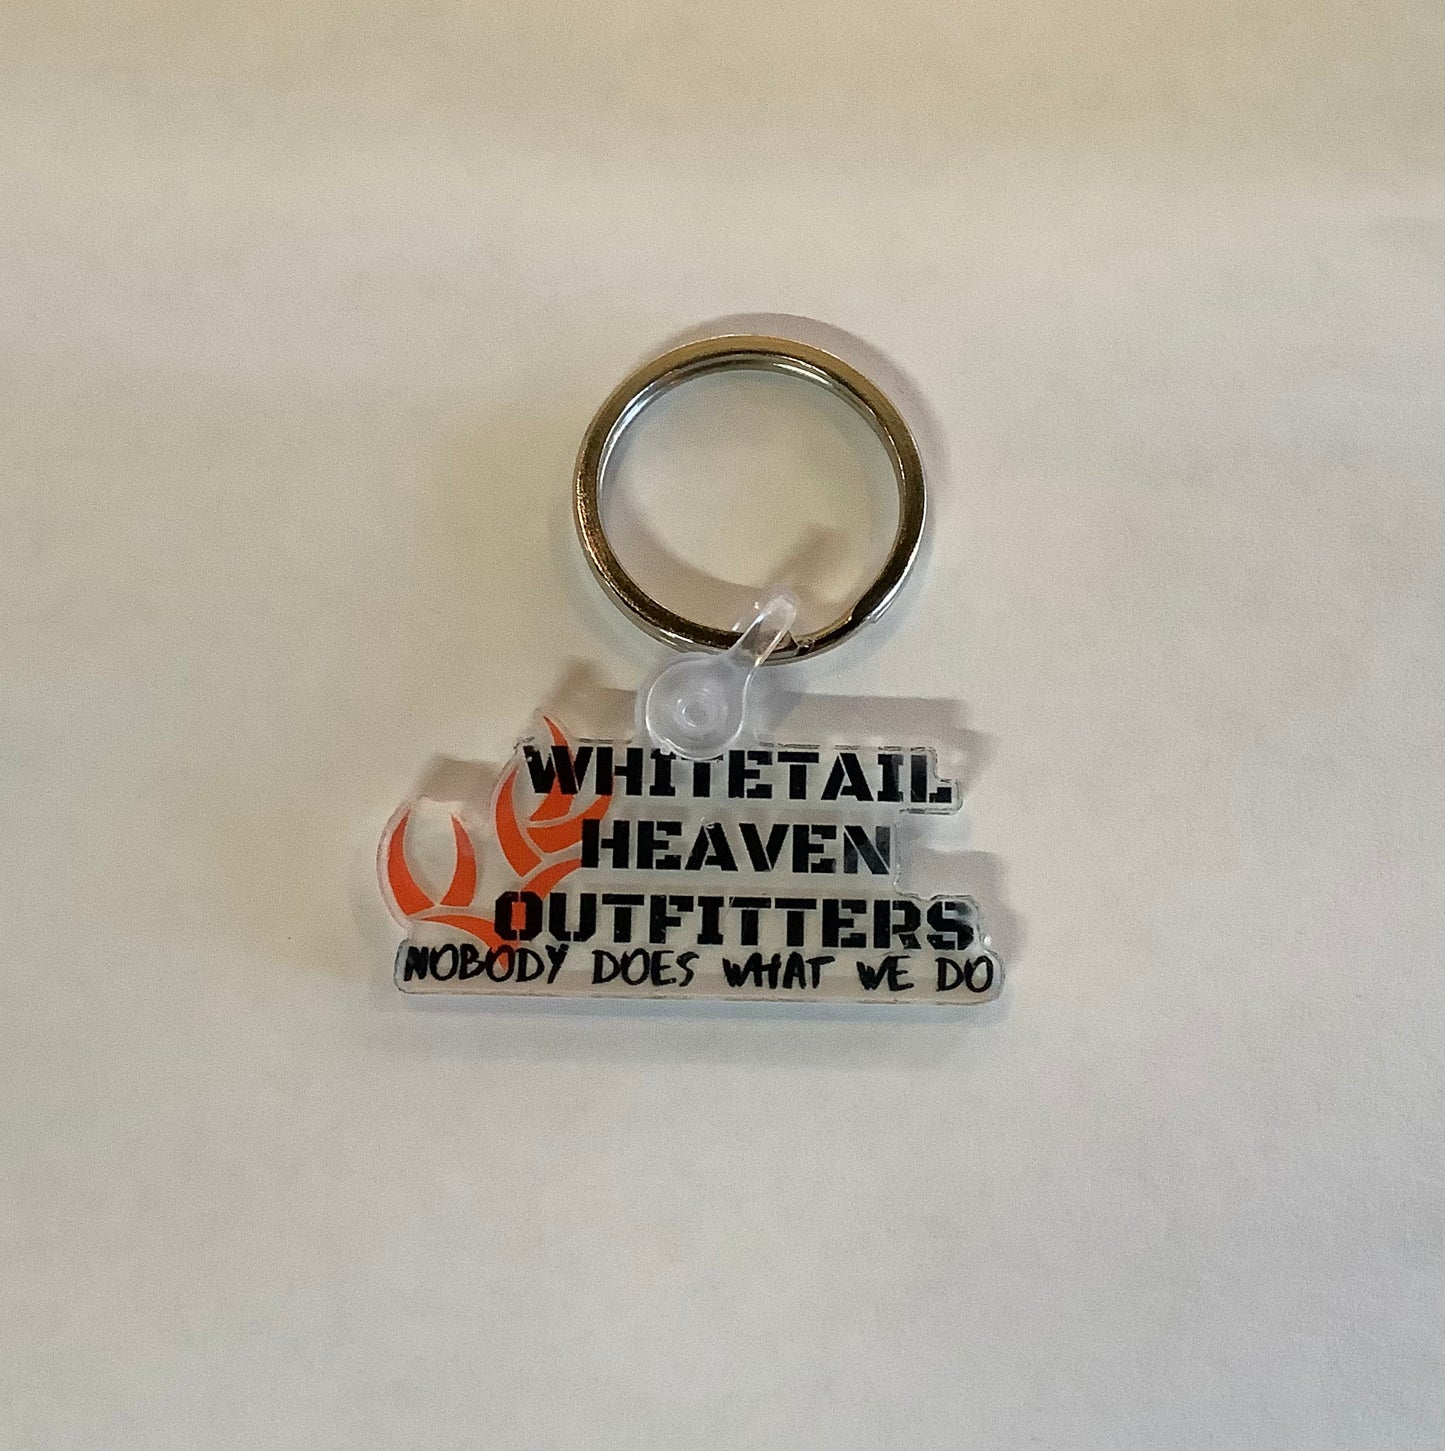 NEW WHITETAIL HEAVEN OUTFITTERS LOGO KEYCHAIN